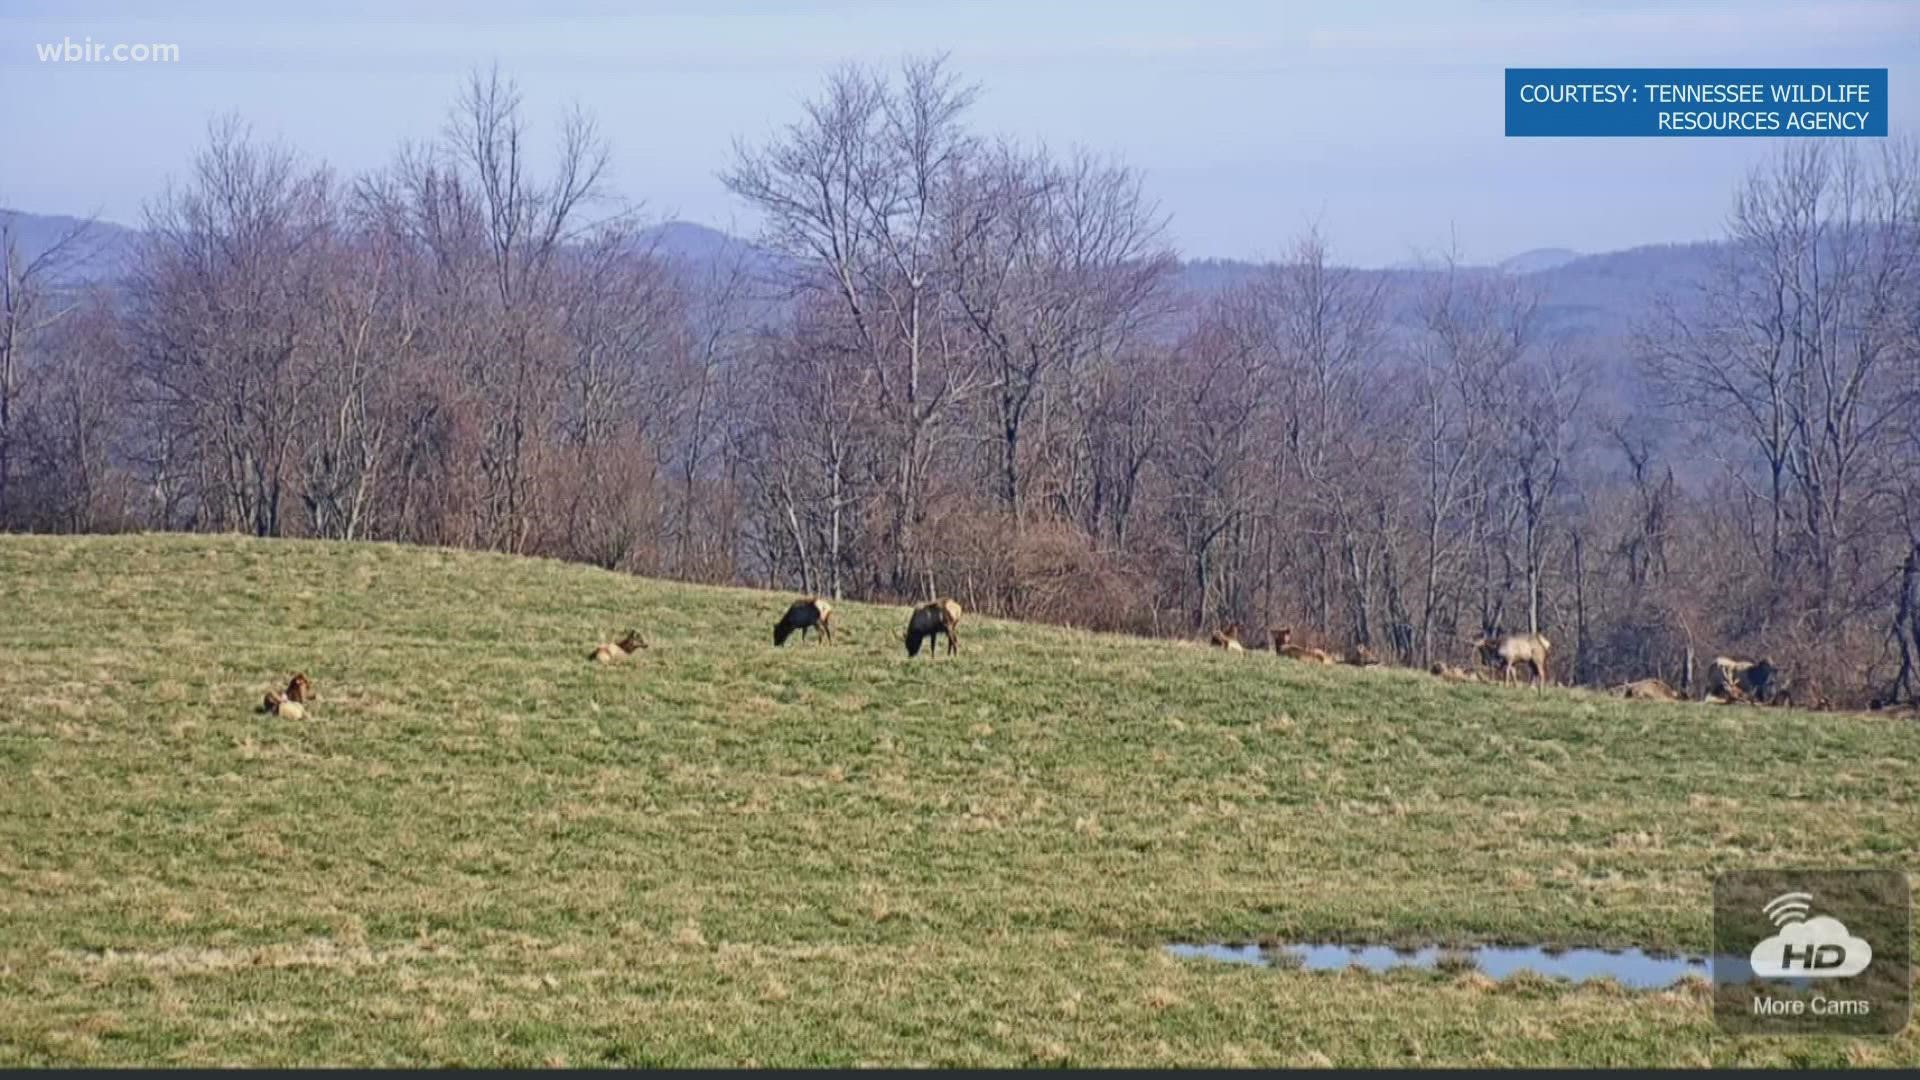 The camera is set up at Hatfield Knob, and officials with the TWRA said people can tune in to catch all kinds of wildlife pass by.